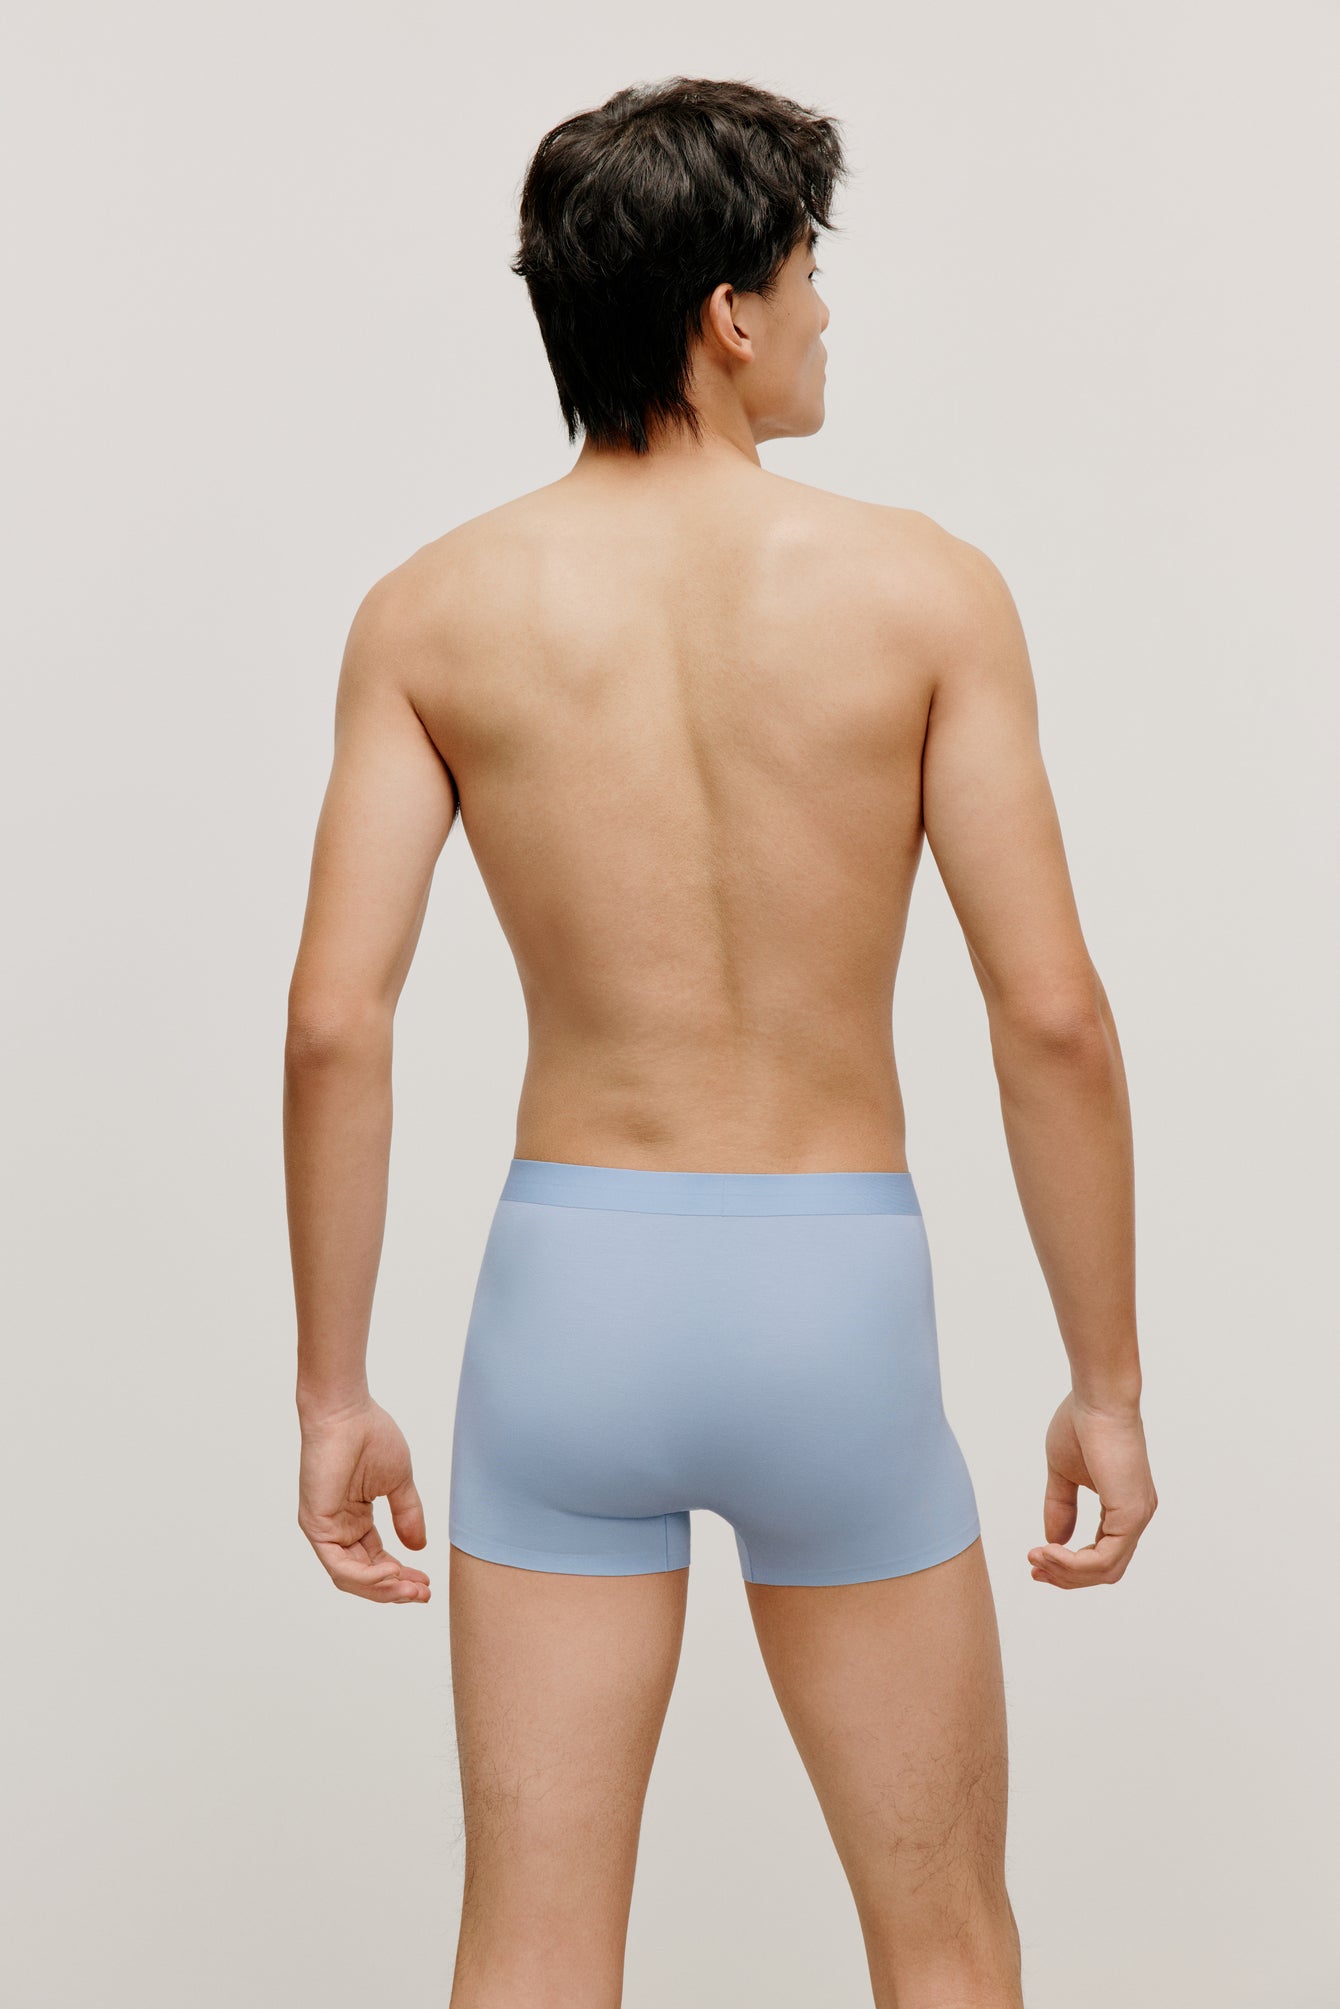 back of a man wearing a blue brief